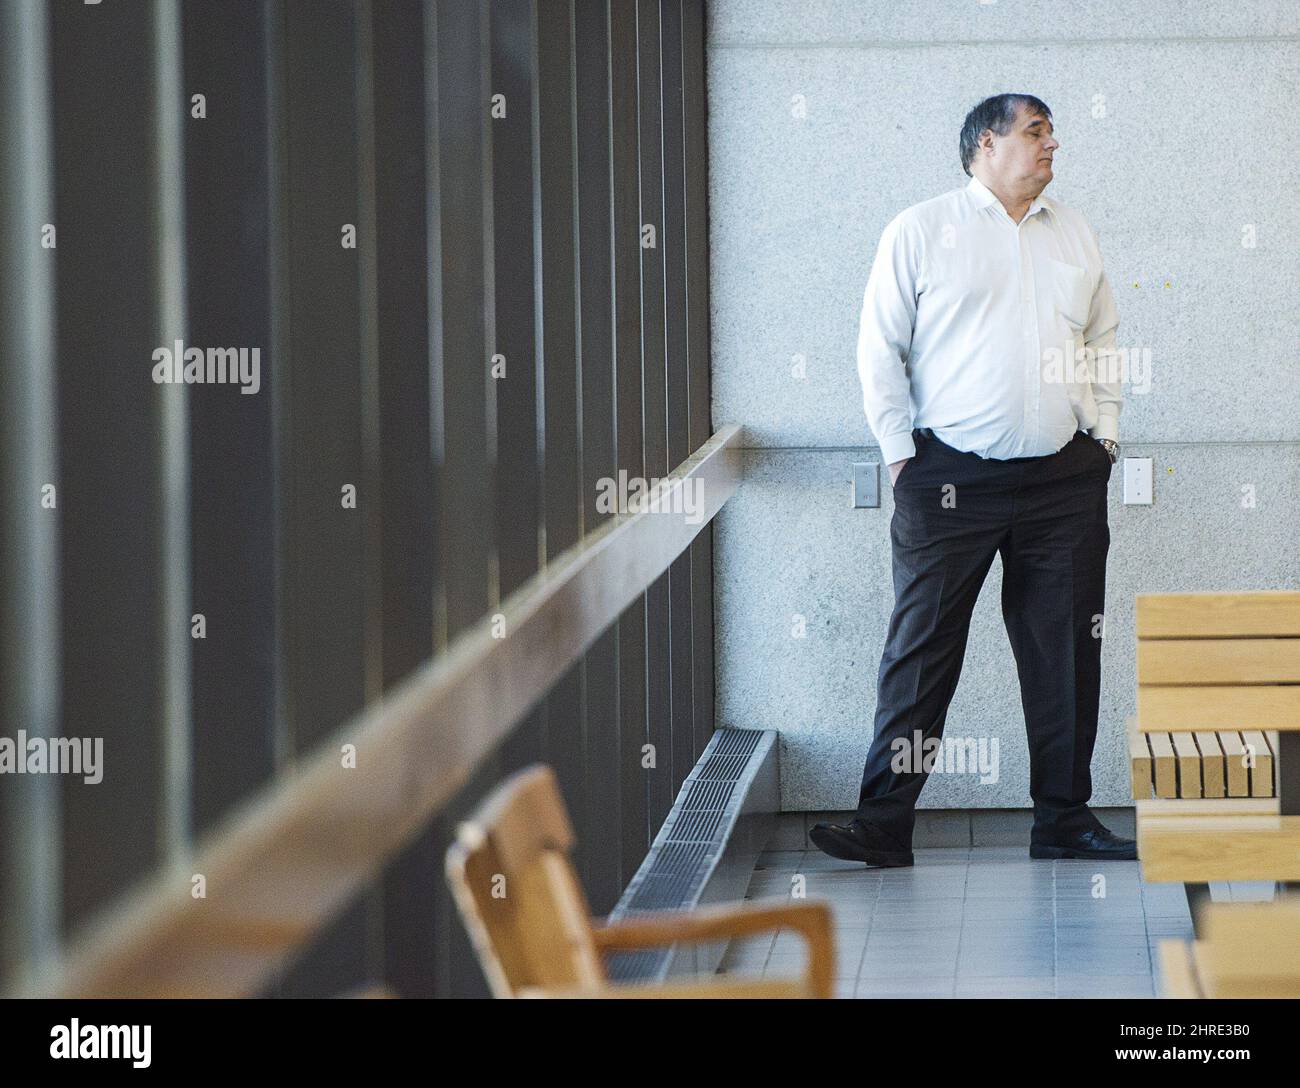 Rail traffic controller Richard Labrie, waits in the hallway as the jury deliberates for the fourth day Sunday, January 14, 2018 in Sherbrooke, Que. THE CANADIAN PRESS/Ryan Remiorz Stock Photo